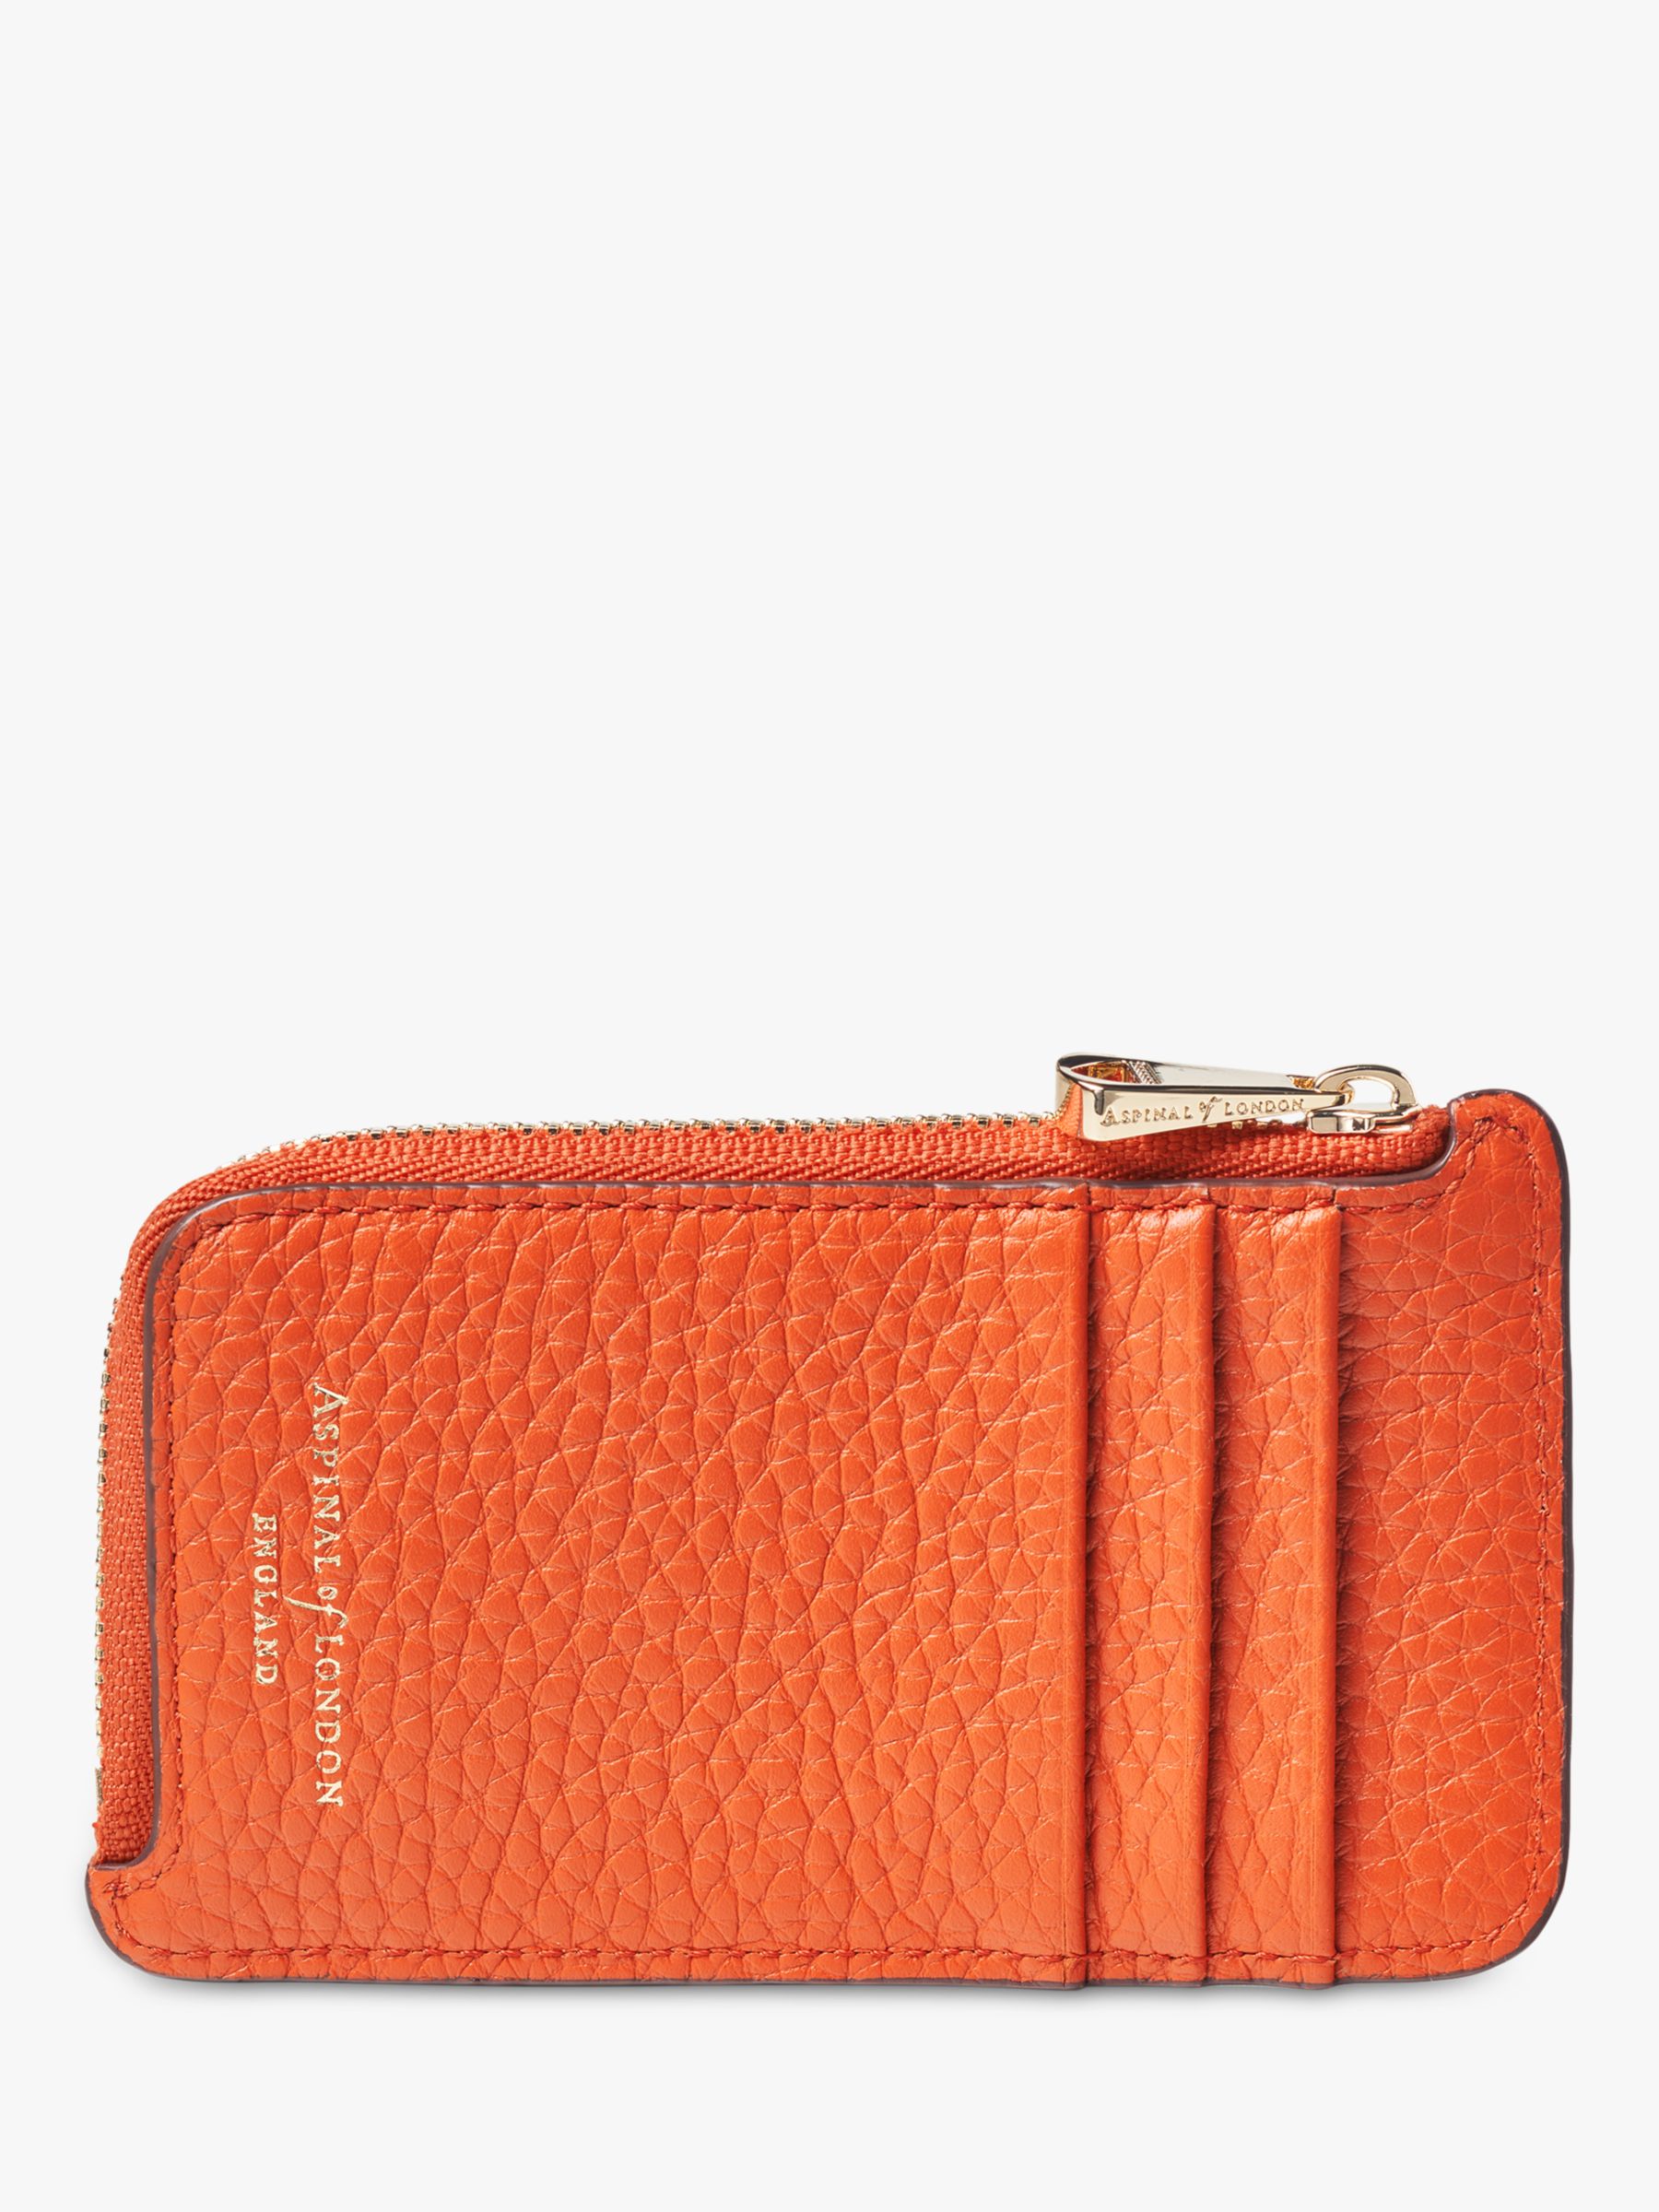 Aspinal of London Pebble Leather Zipped Coin and Card Holder, Orange at ...